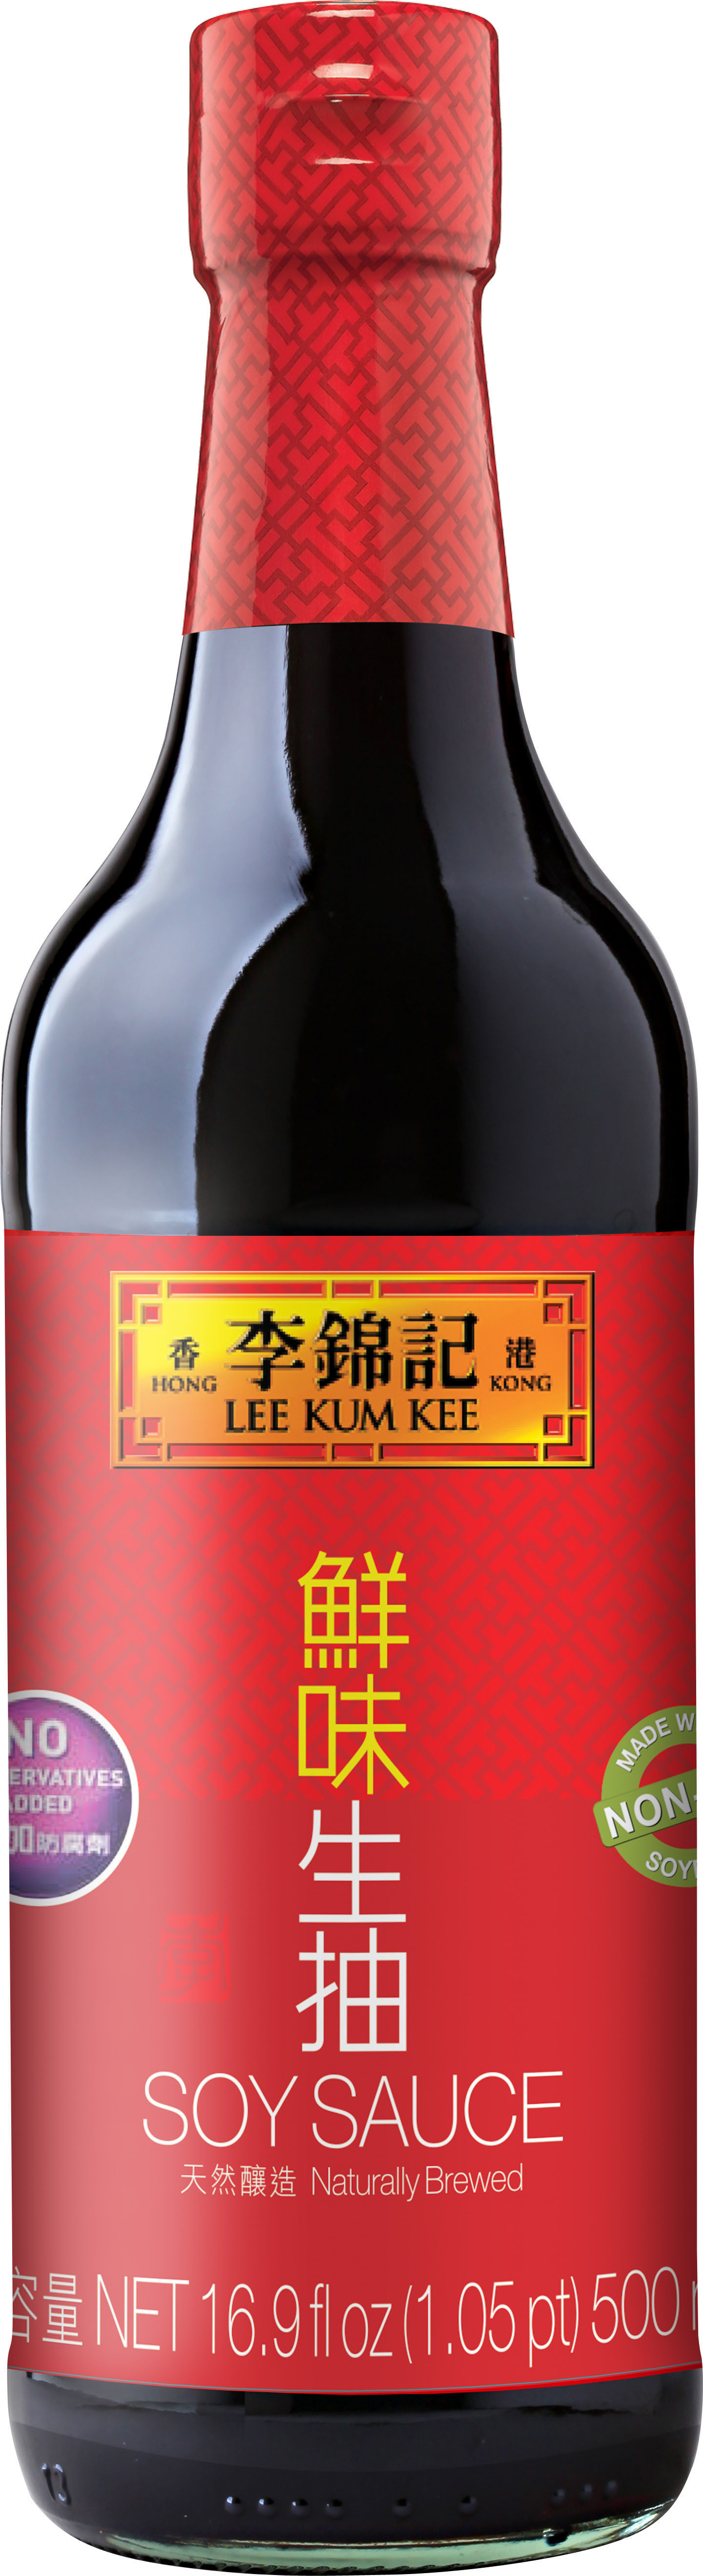 Soy Sauce Soy Sauce Lee Kum Kee Home Usa,Lava Flow Recipe With Captain Morgan